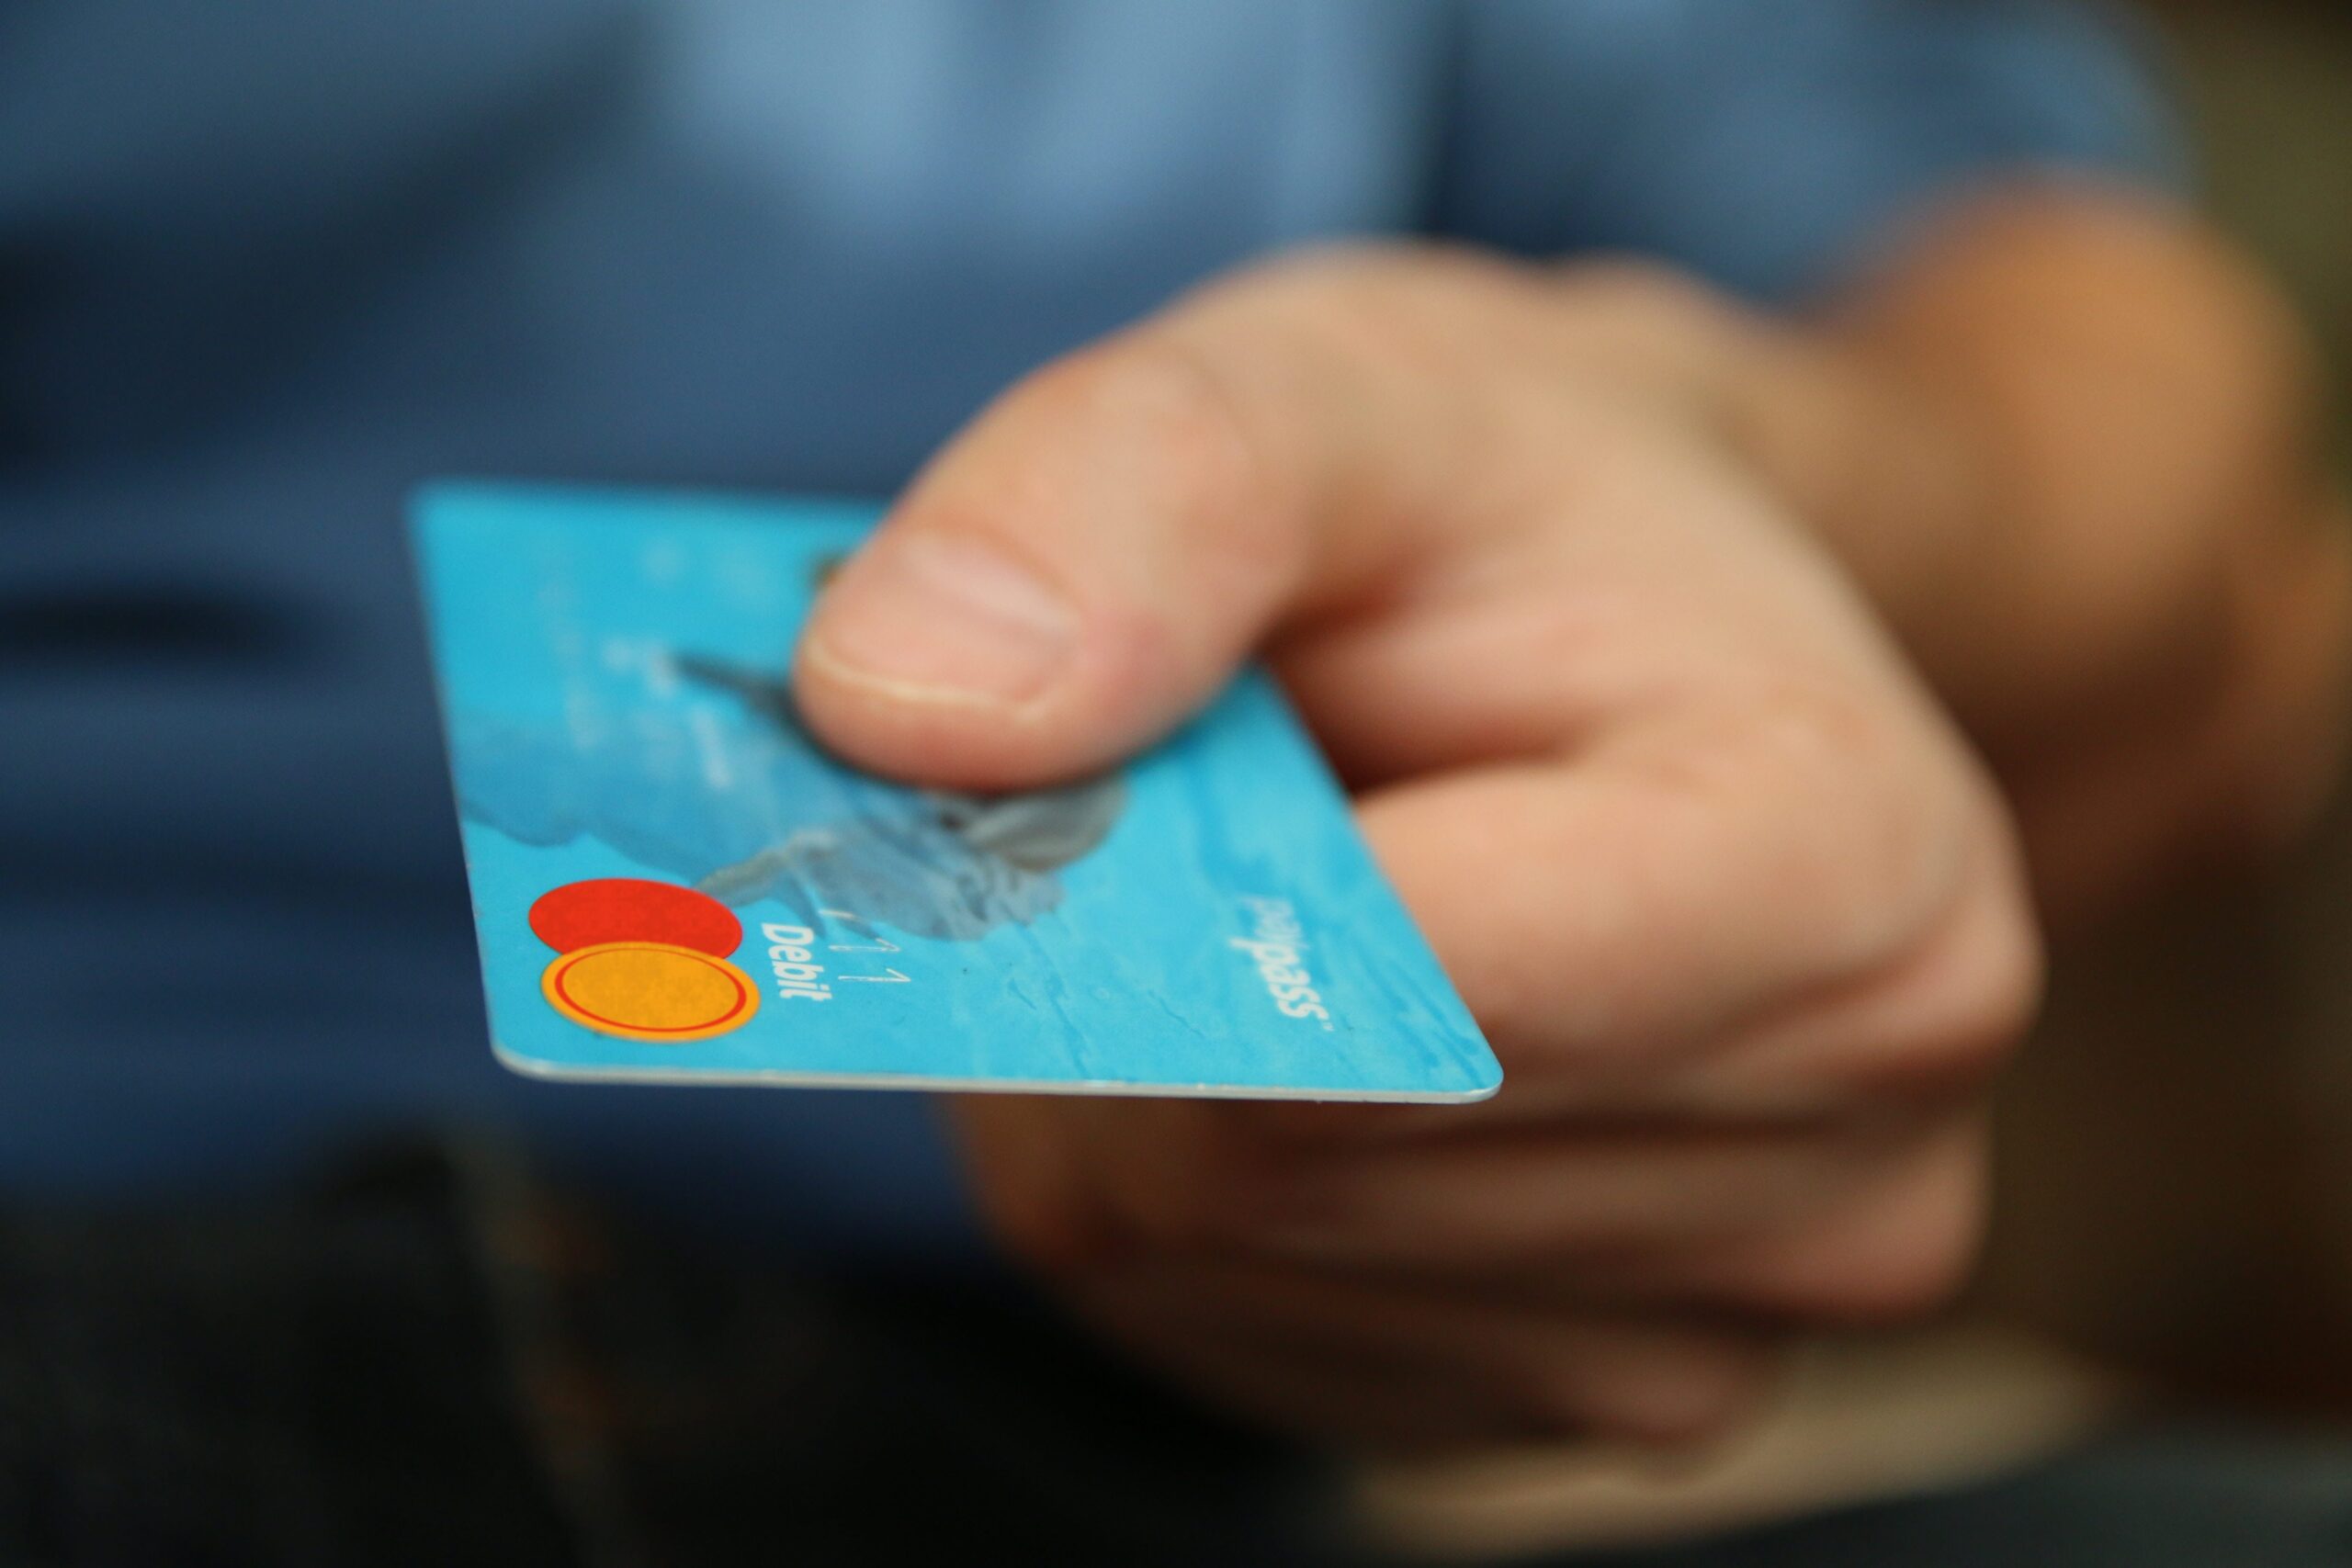 man holding credit card to use to pay for things and increase his debt